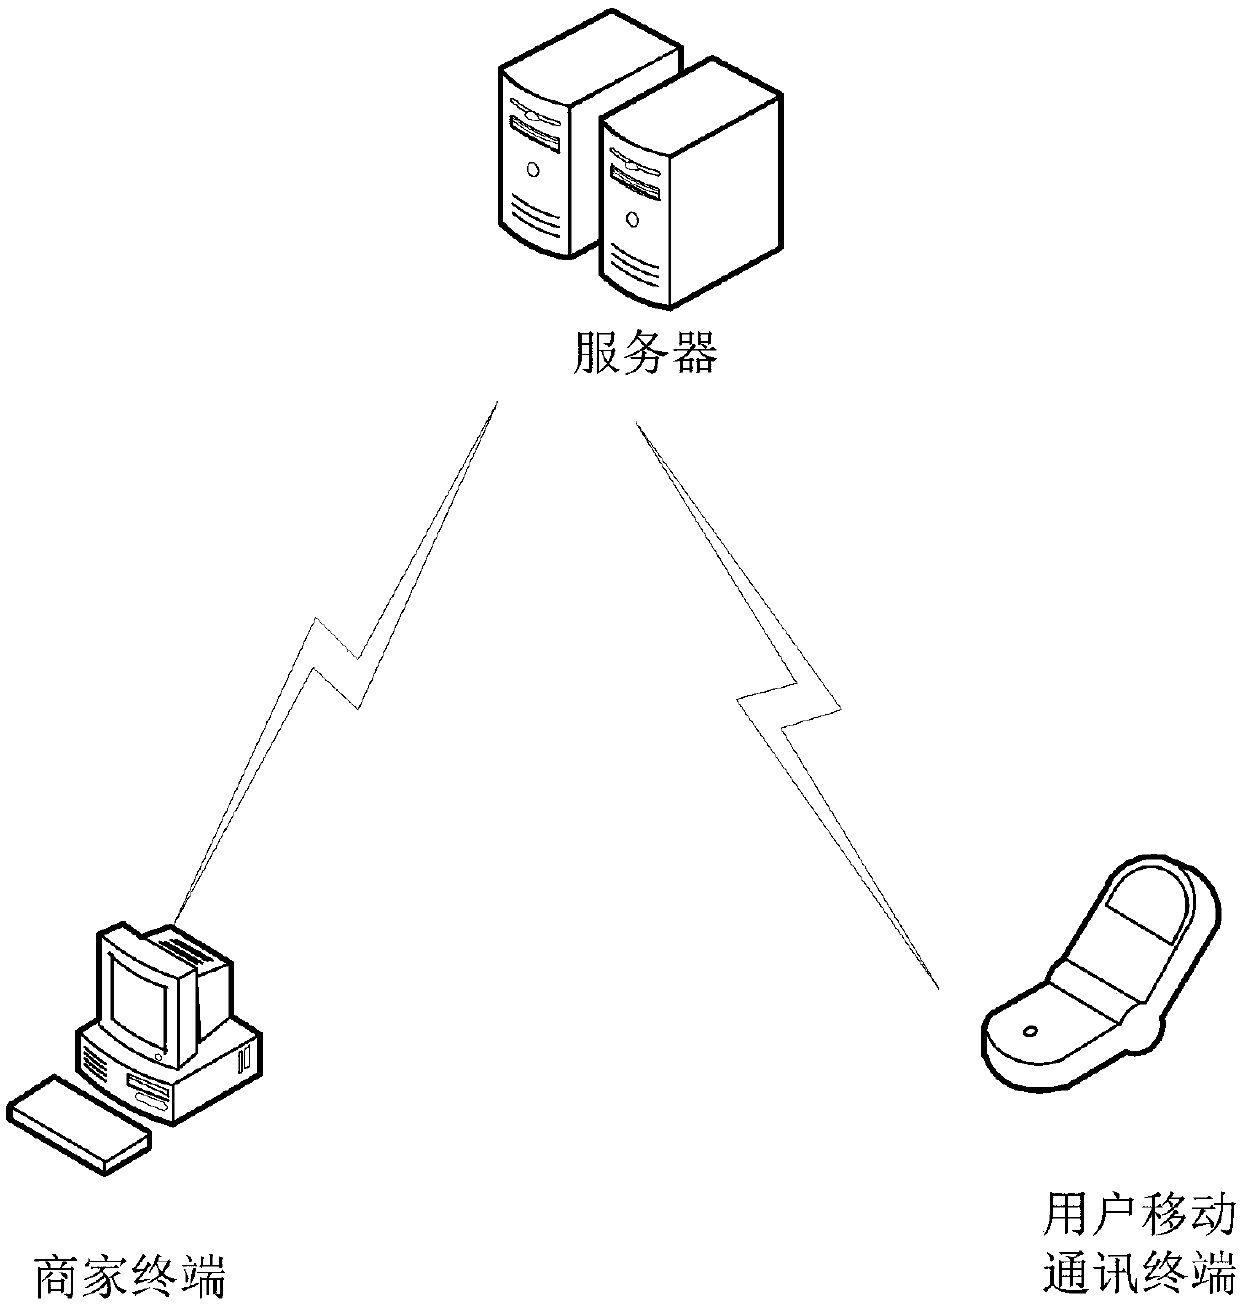 Electronic coupon issuing method, cloud server and user mobile communication terminal